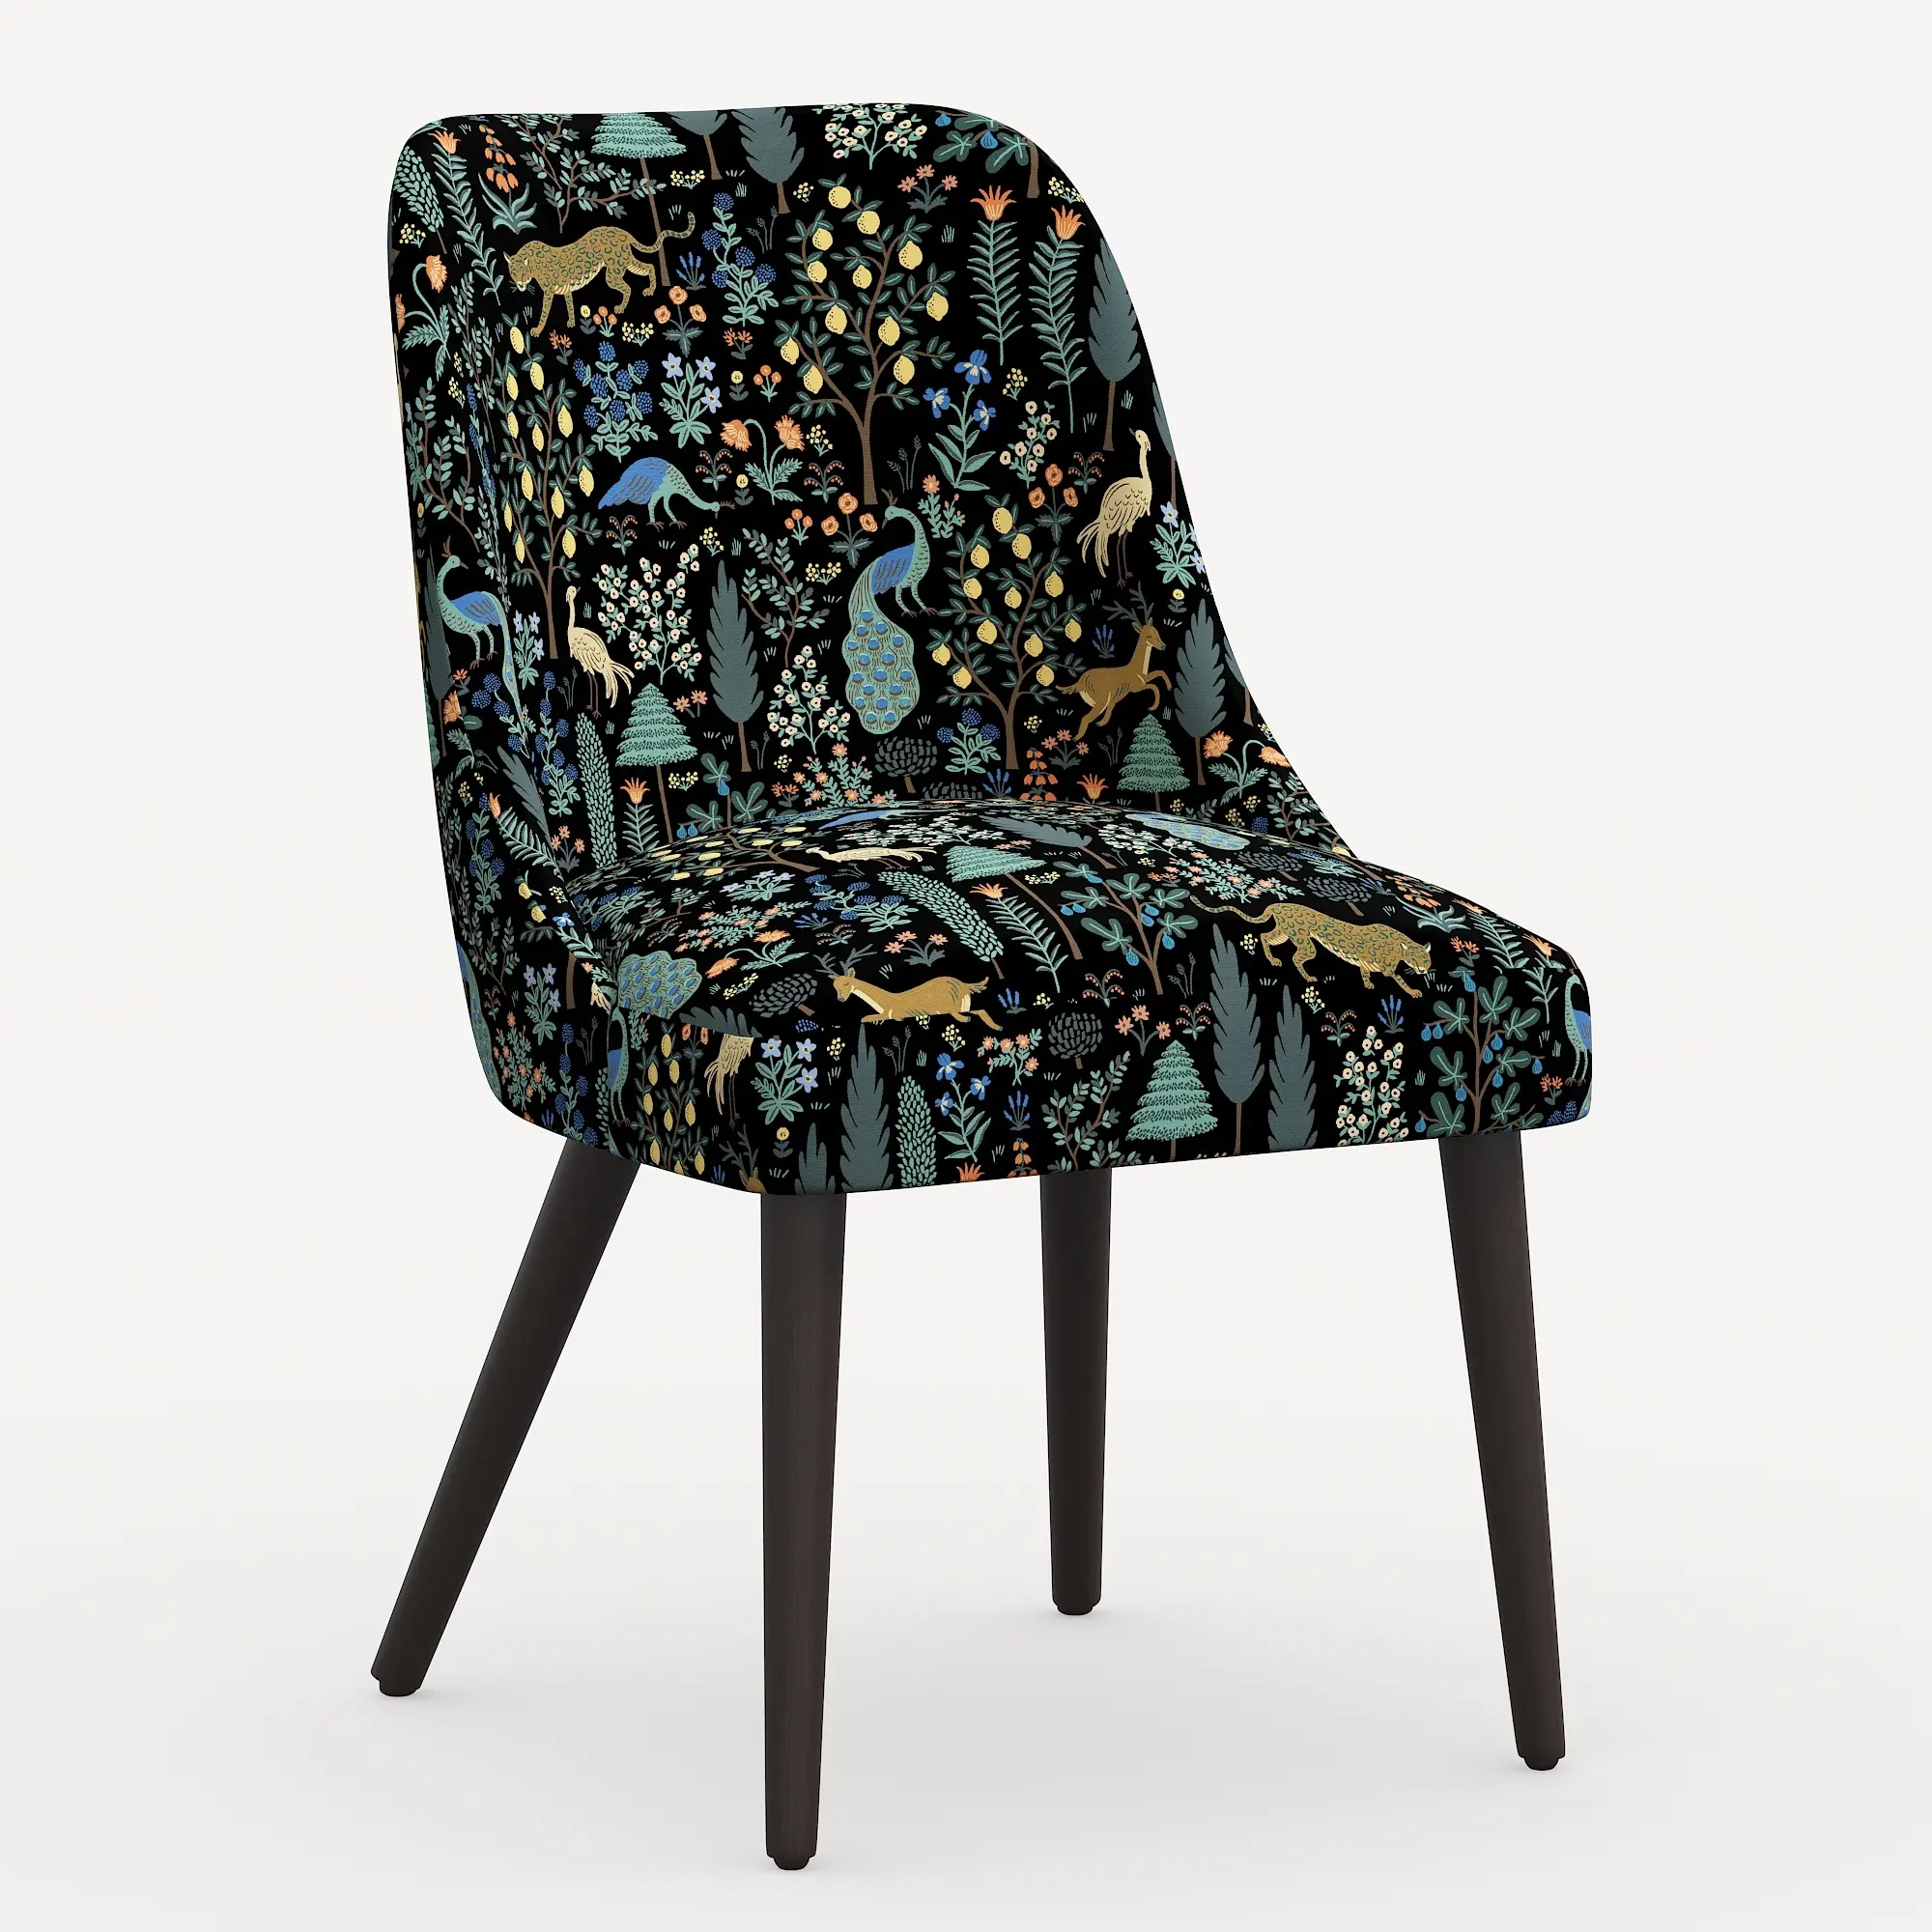 Rifle Paper Co. Clare Menagerie Black Dining Chair